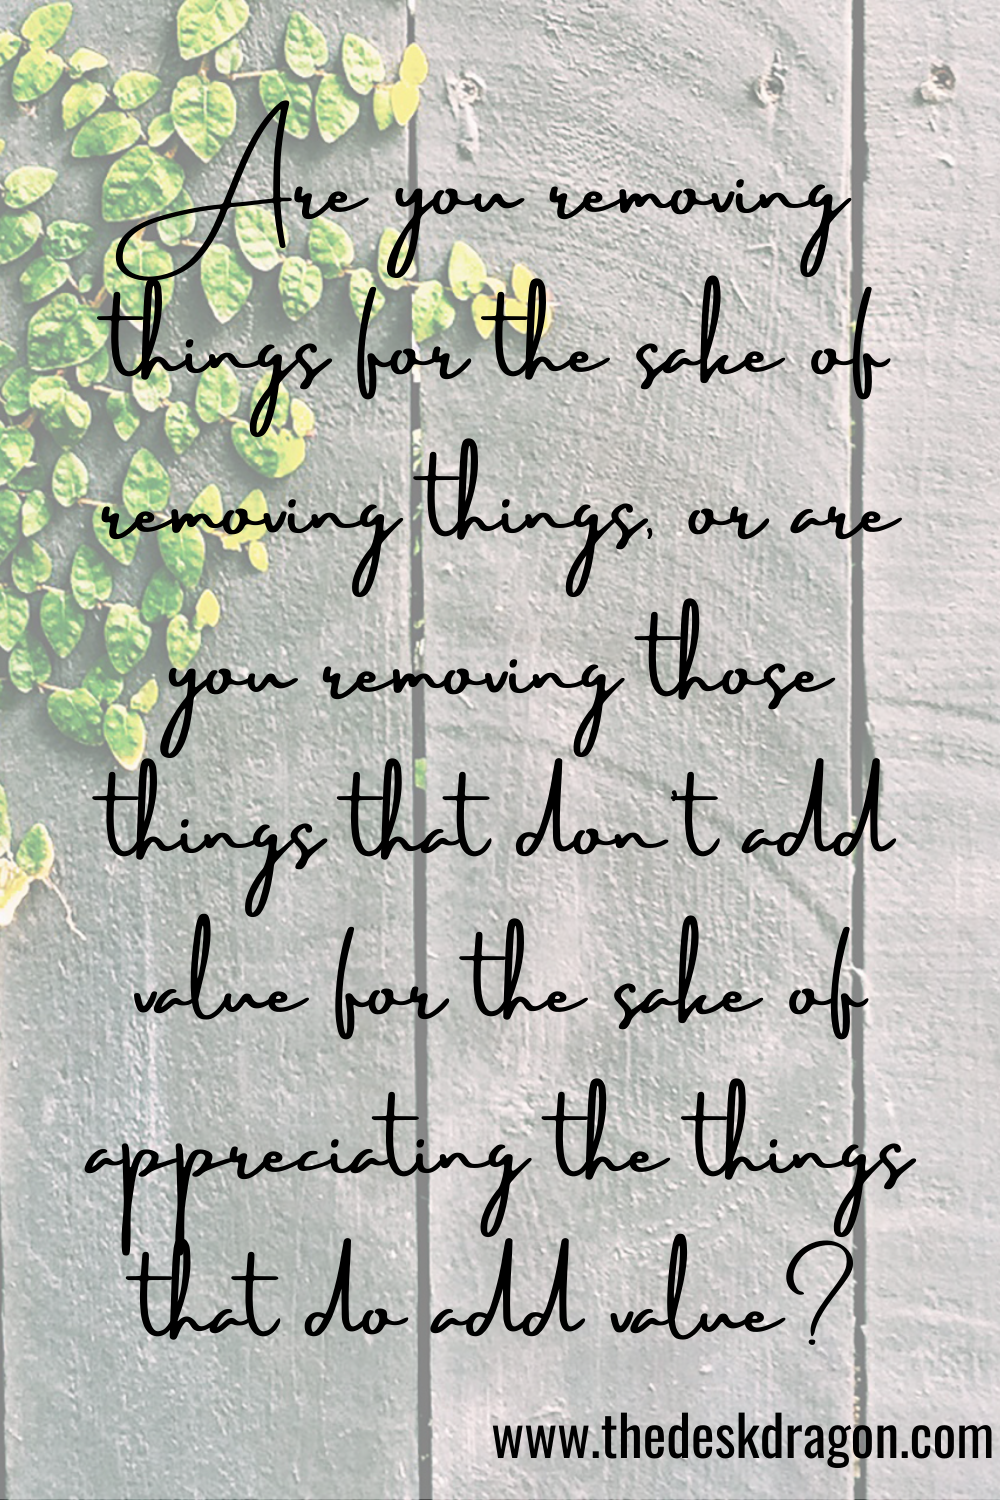 Remove things for the sake of appreciating the things that add value